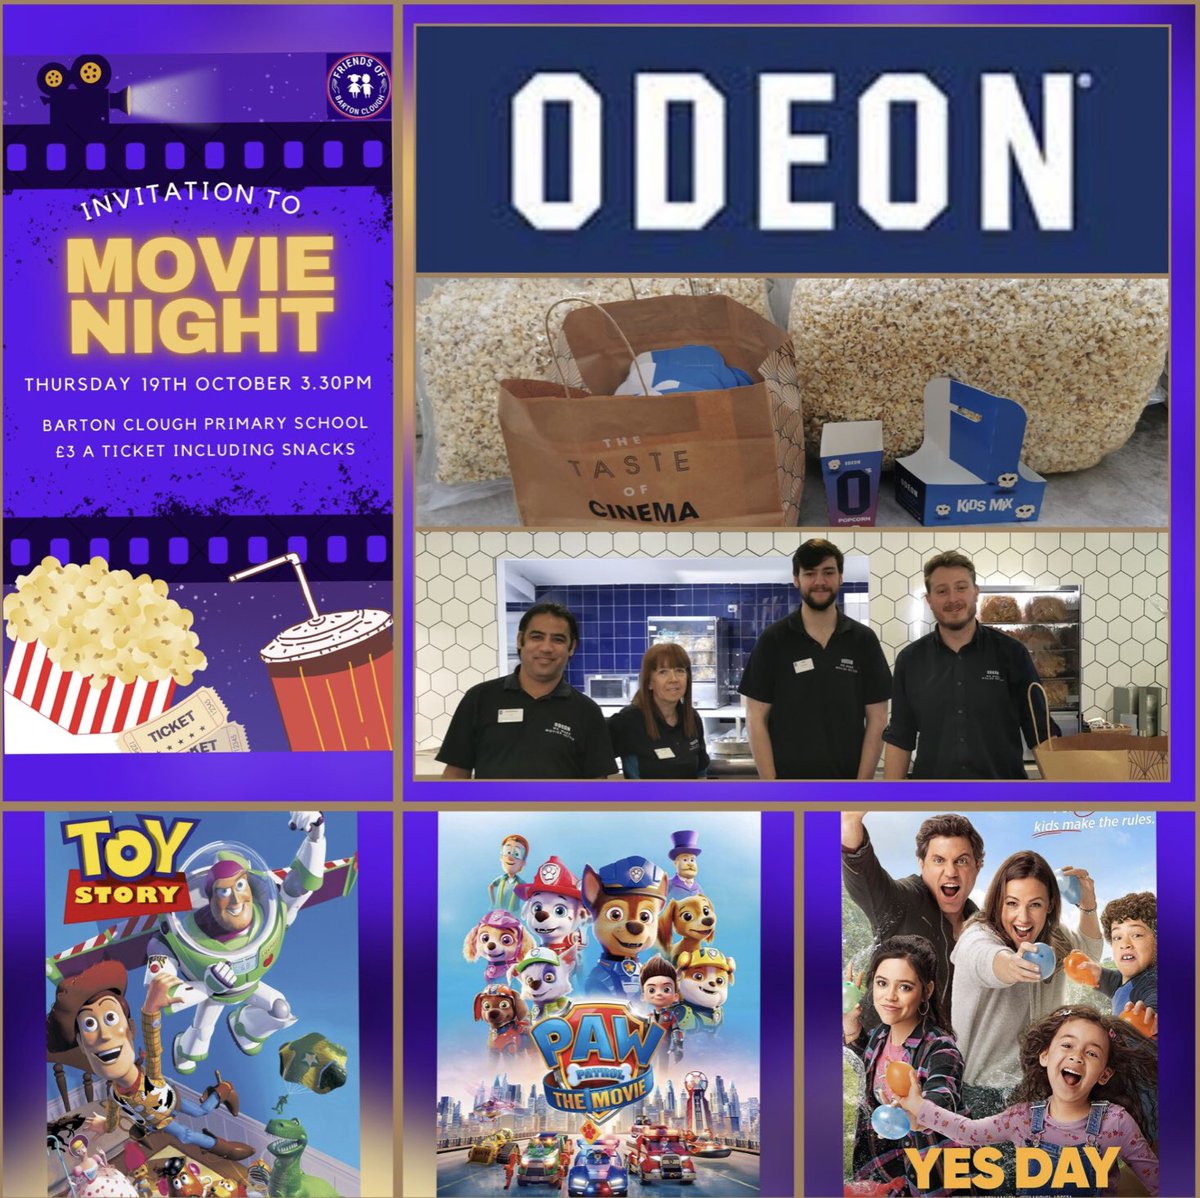 FOBC presents Movie Night!  We are very pleased to share that the FOBC have secured donations from the Odeon at the Trafford Centre ready for Thursday! A big thank you to Darren and his team for their donation of 3 large bags of popcorn, 70 popcorn boxes and 70 snack boxes!